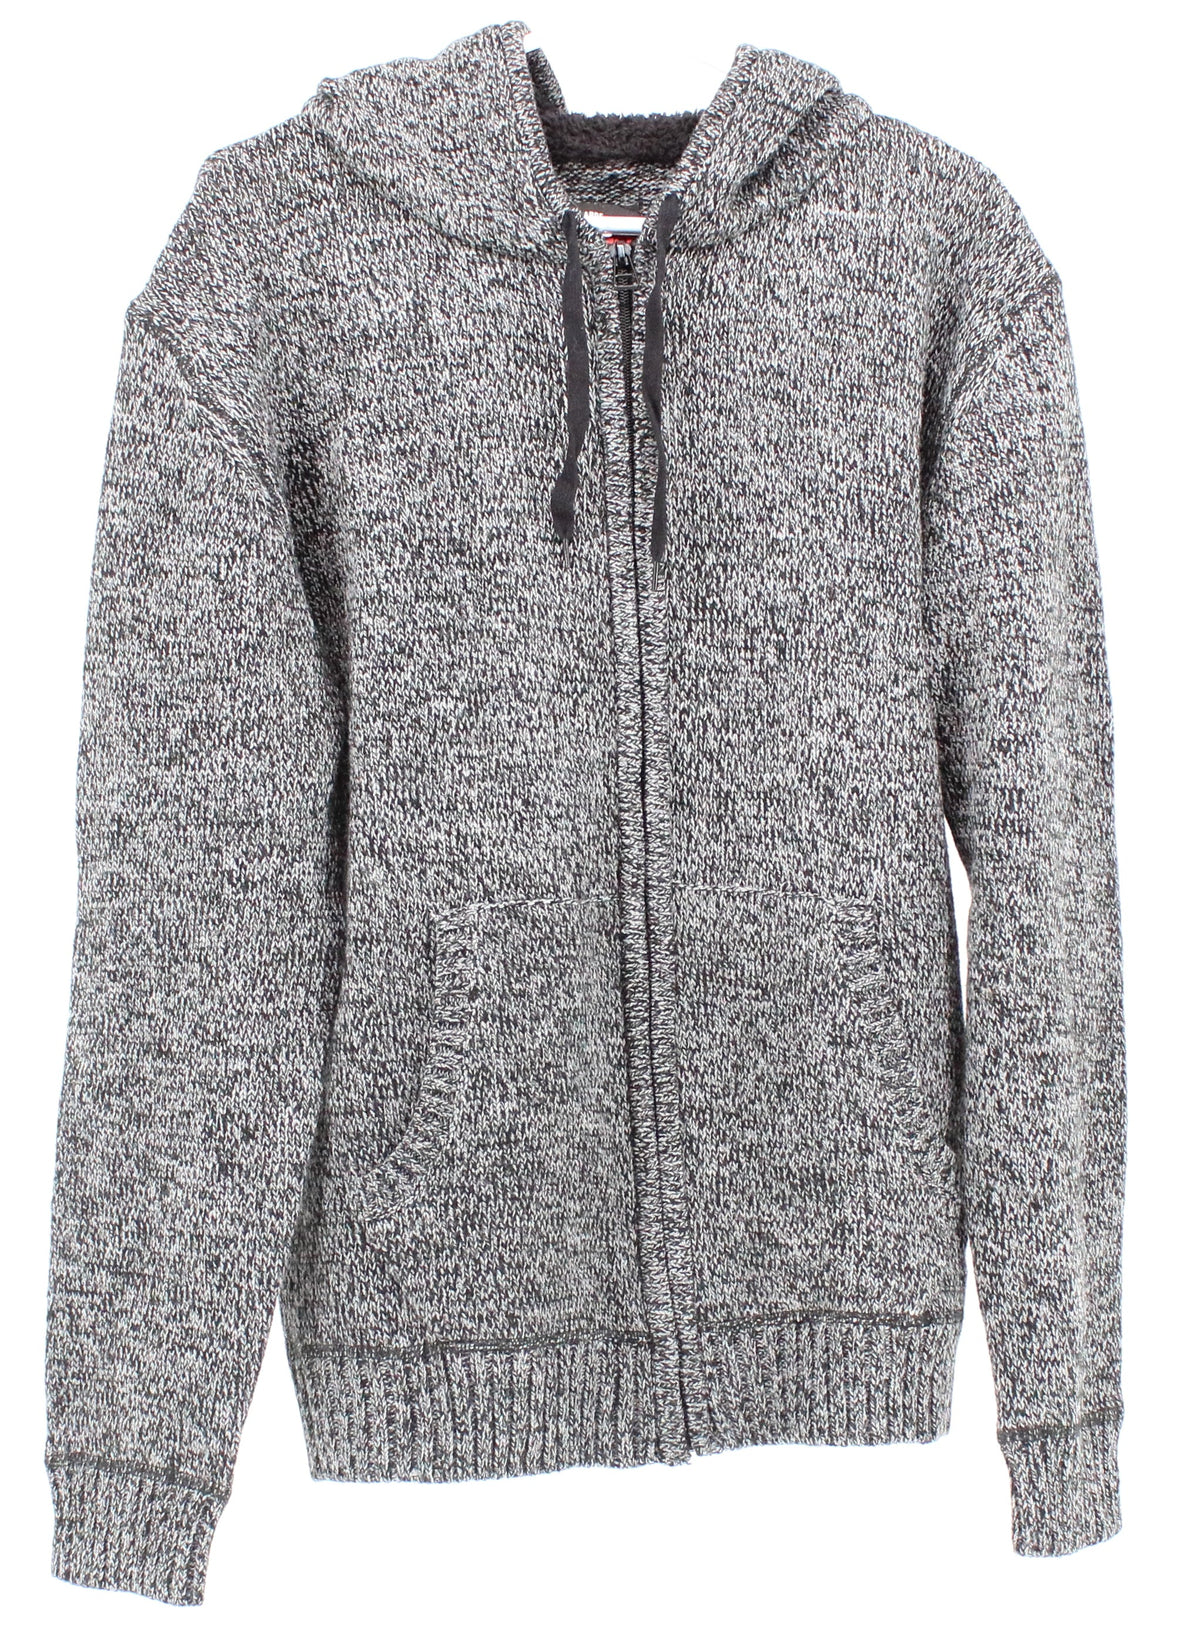 Unionboy Grey and Black Zip Up Men's Hooded Sweater